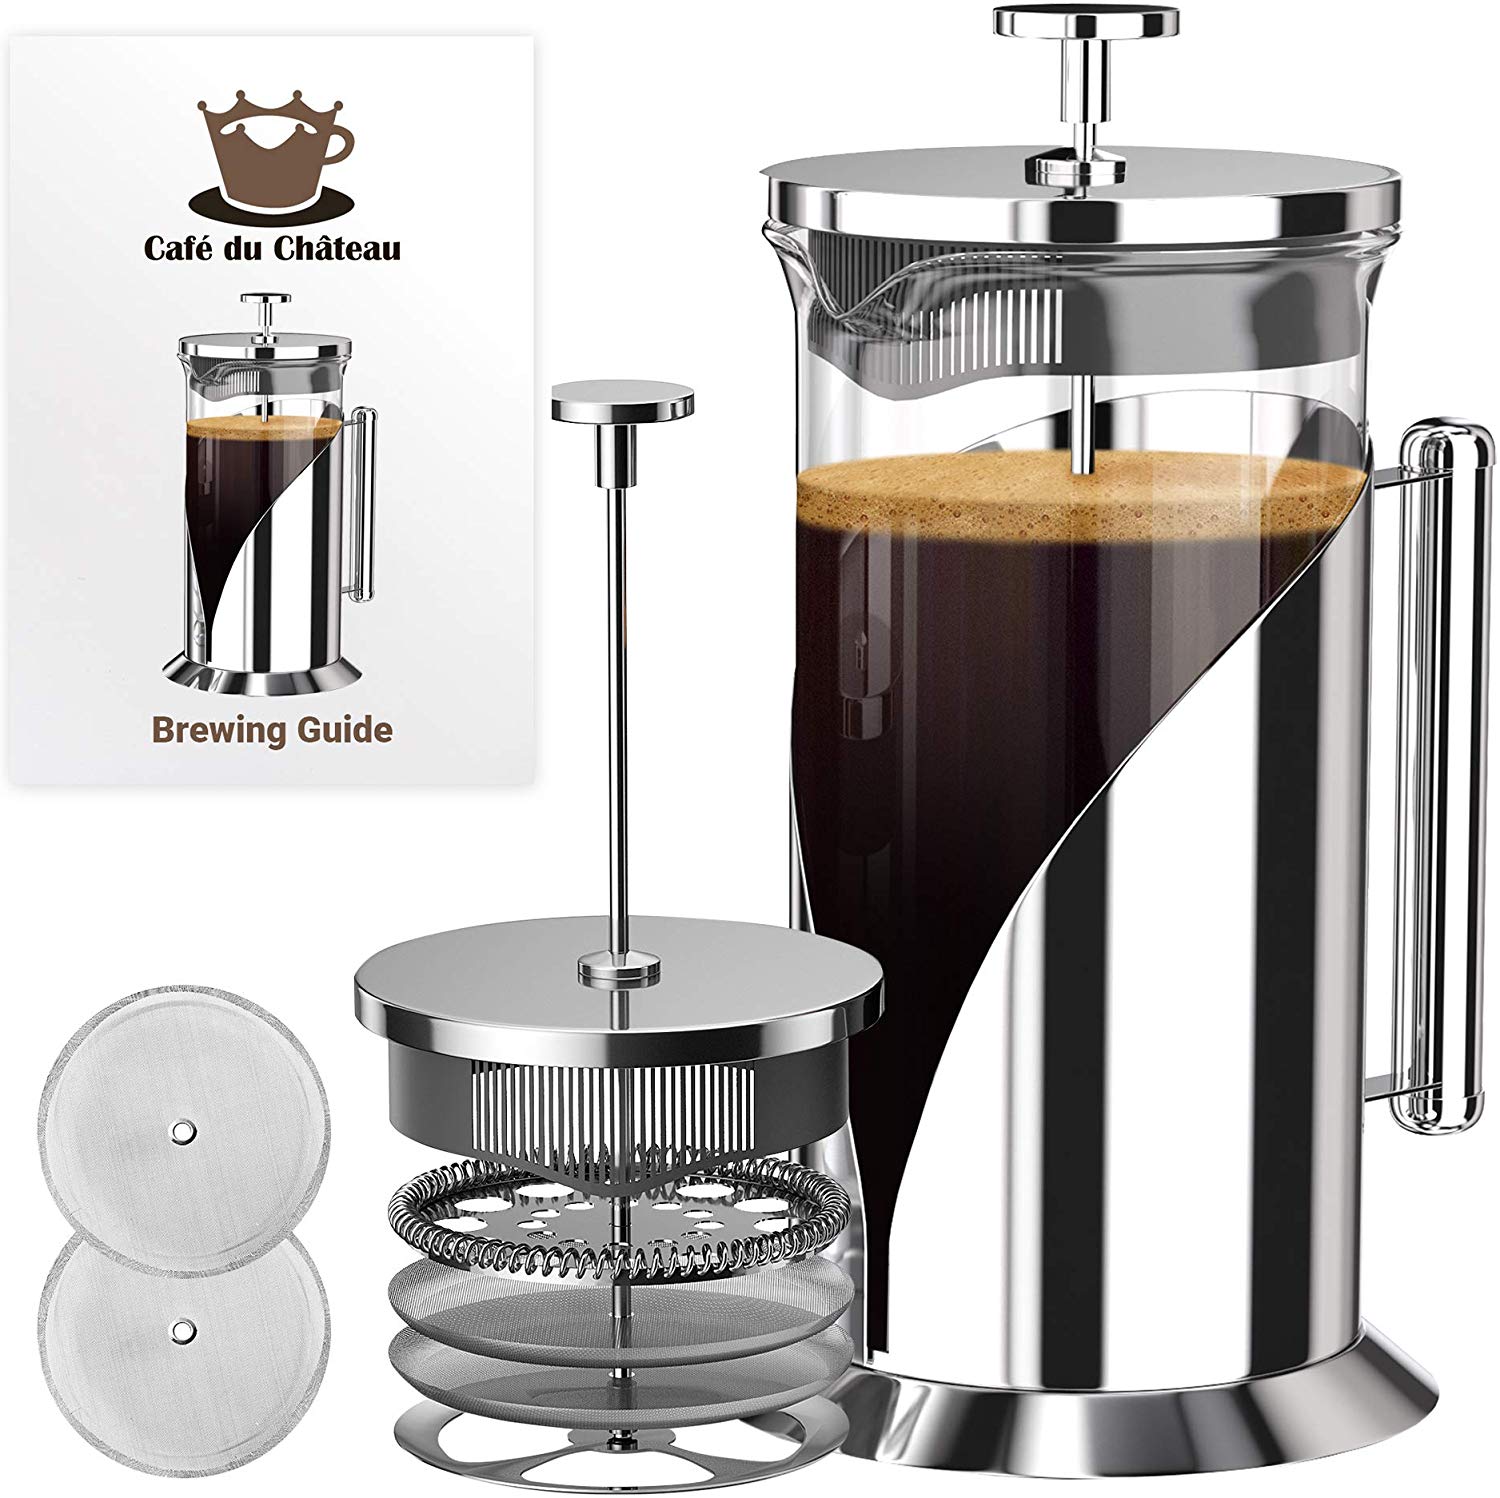 Glass French Press Coffee Maker Keeps Hot and Cold Longer 4 Level Filtration System Heat Resistant Borosilicate Durable Glass Great Gift Idea Unique Double Wall Design Brewer 34 oz. 1000ml 